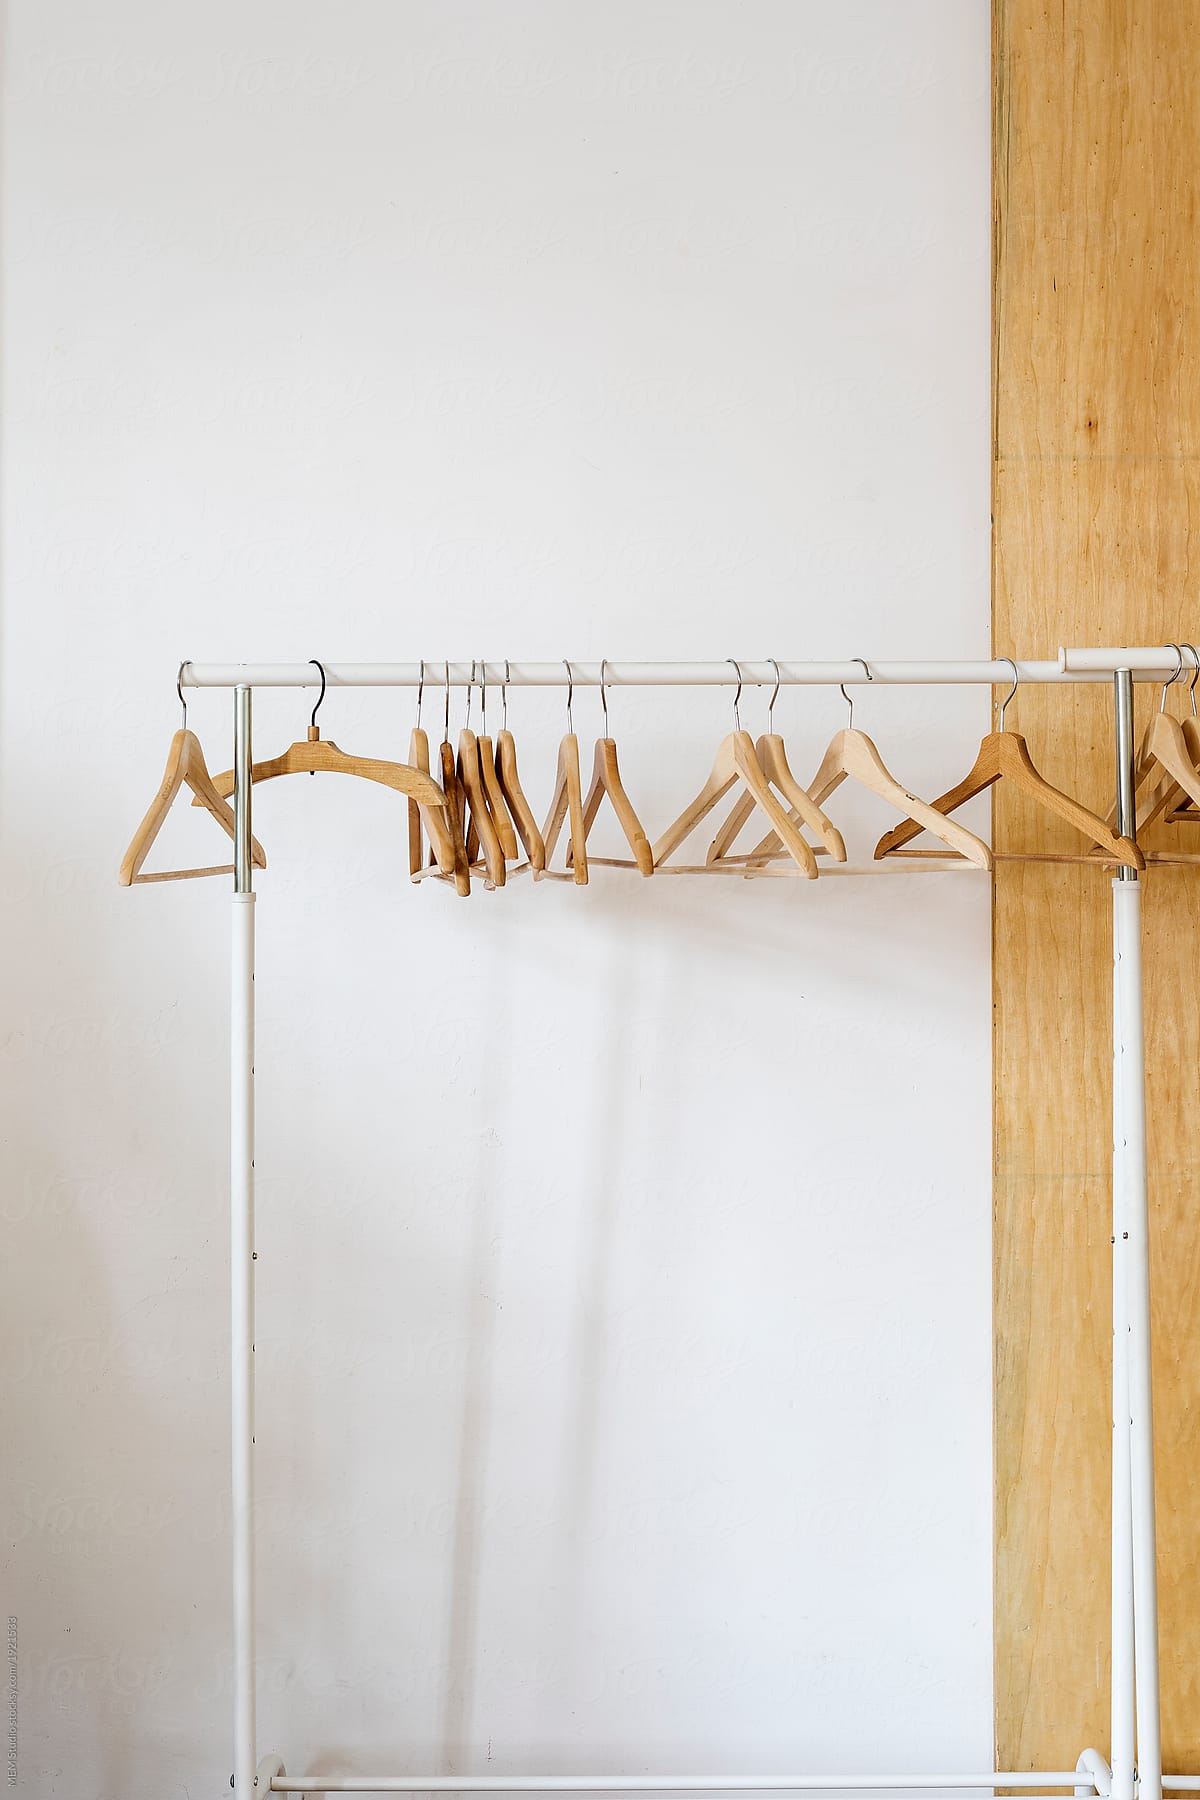 Empty wooden clothes hangers on a clothes rack